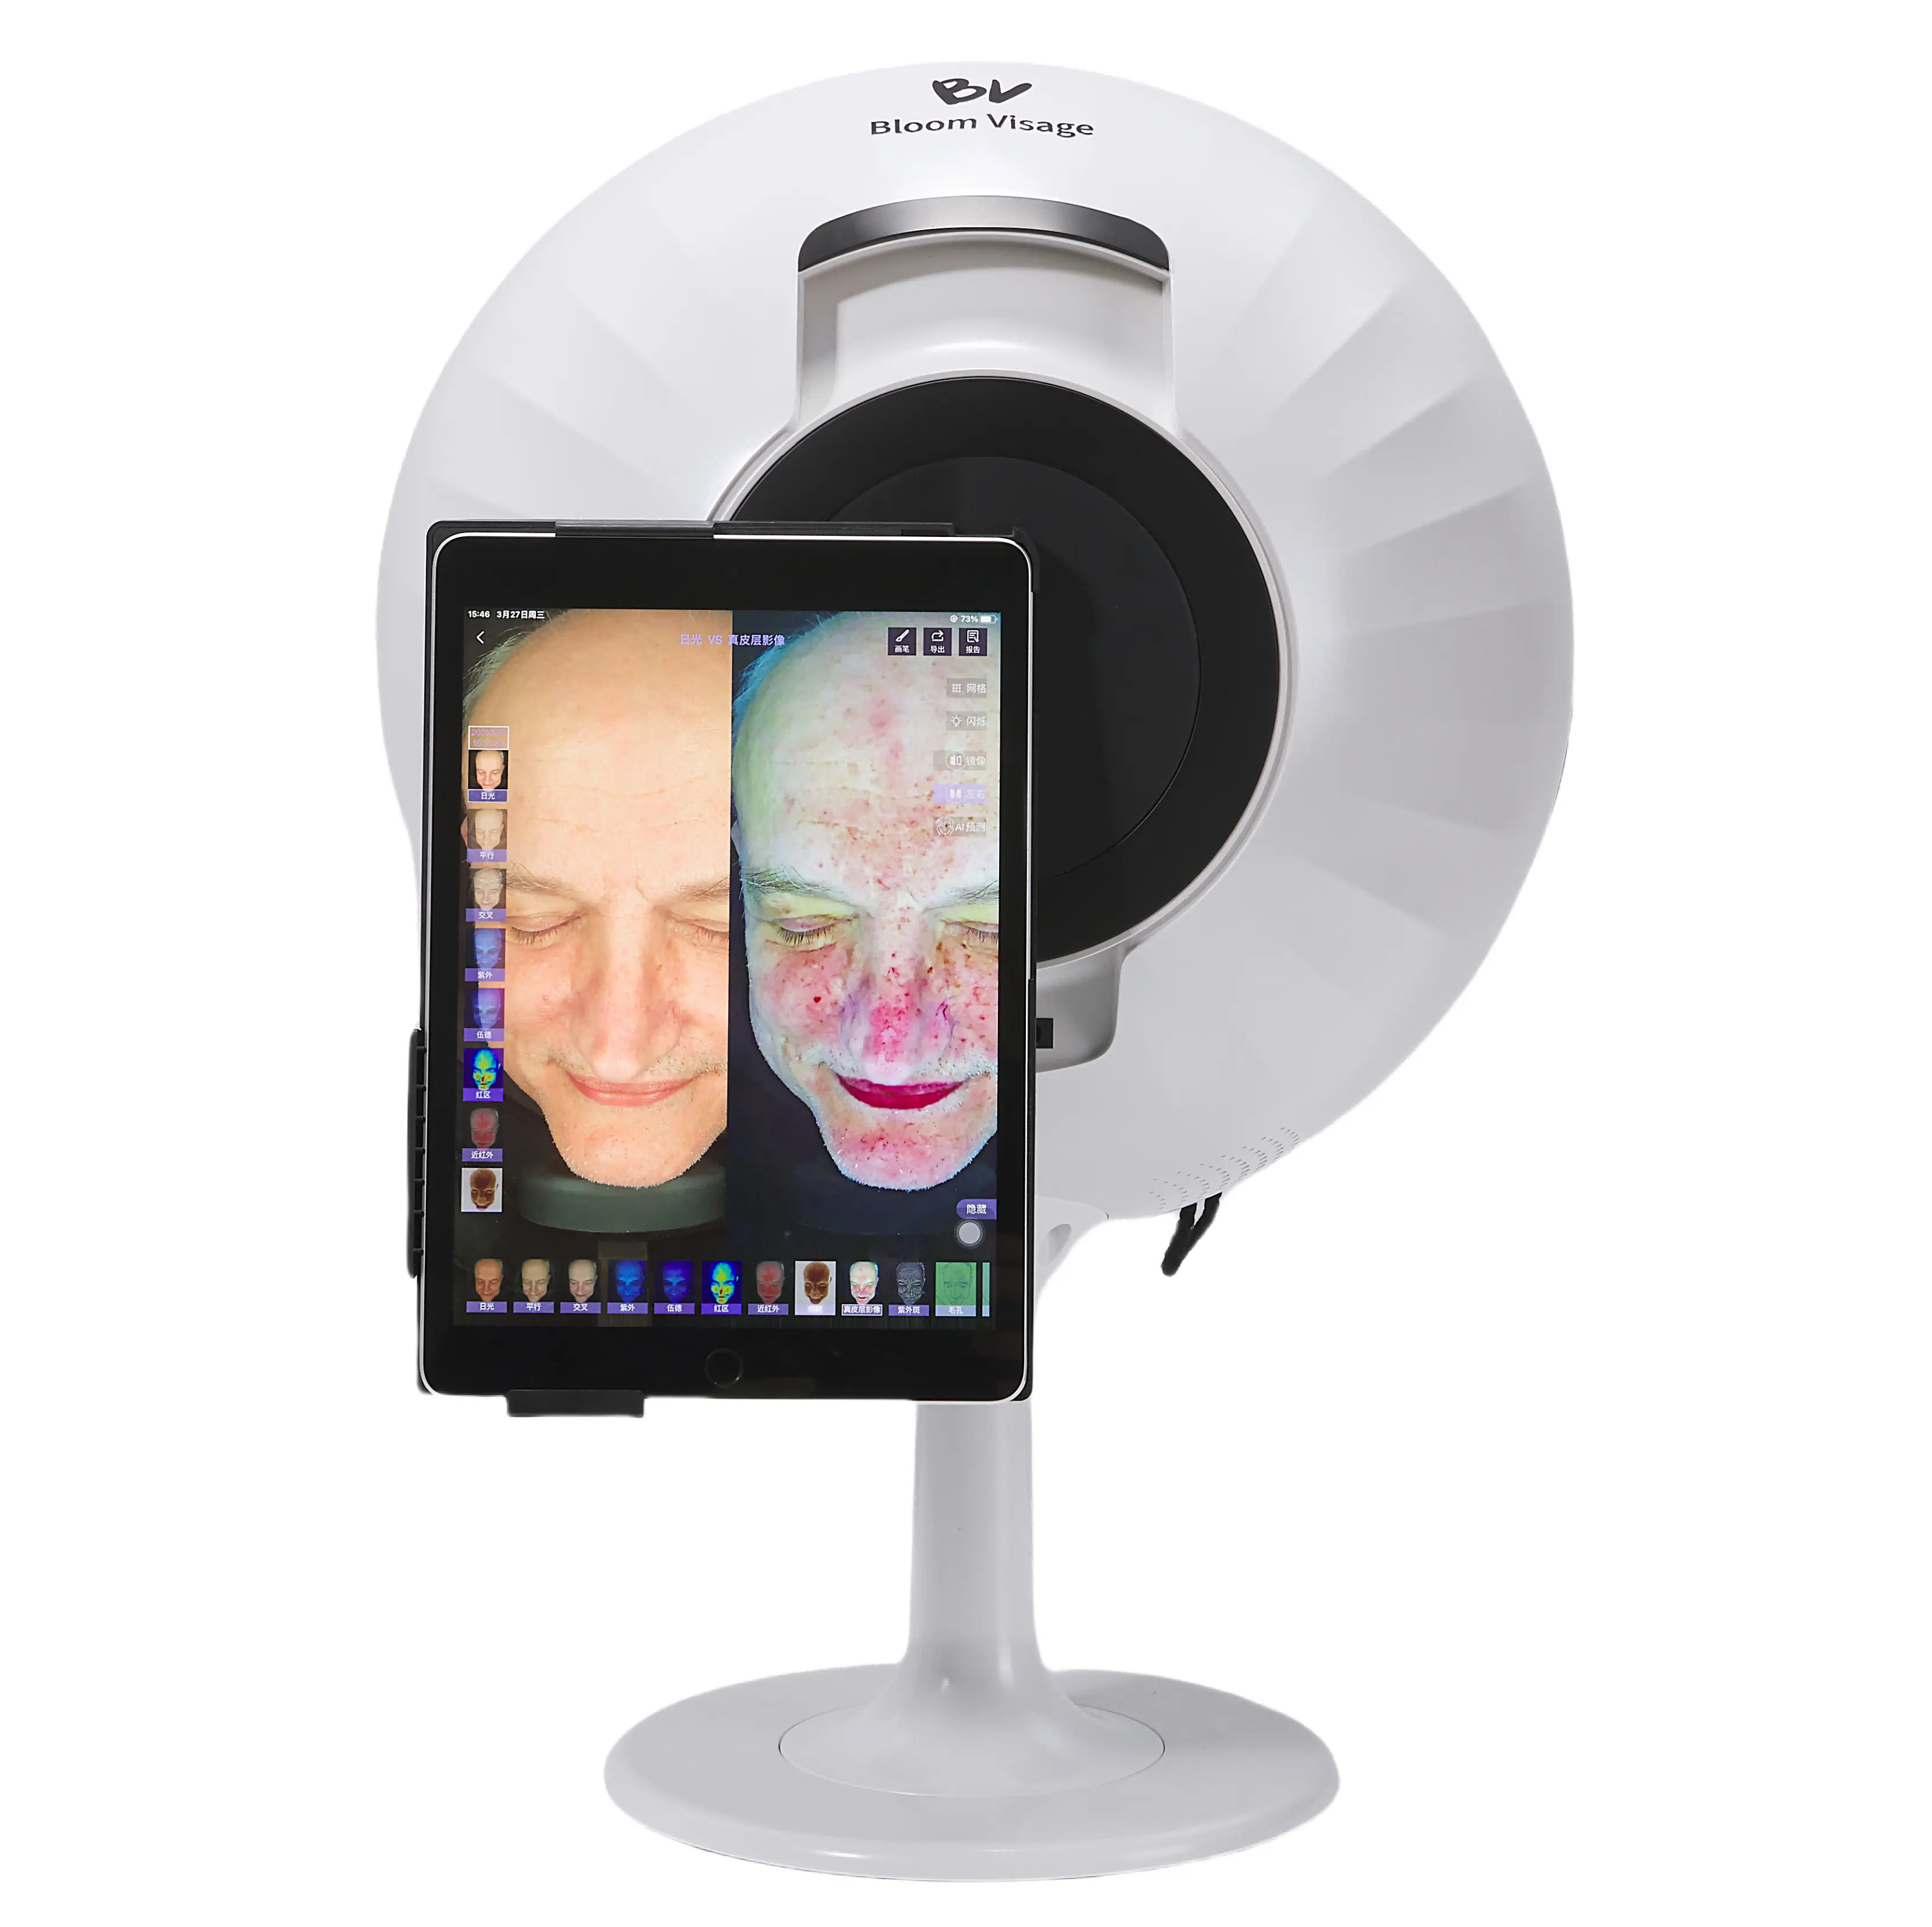 Bloom Visage Skin Analyzer machine for detecting and analyzing facial skin in beauty salons